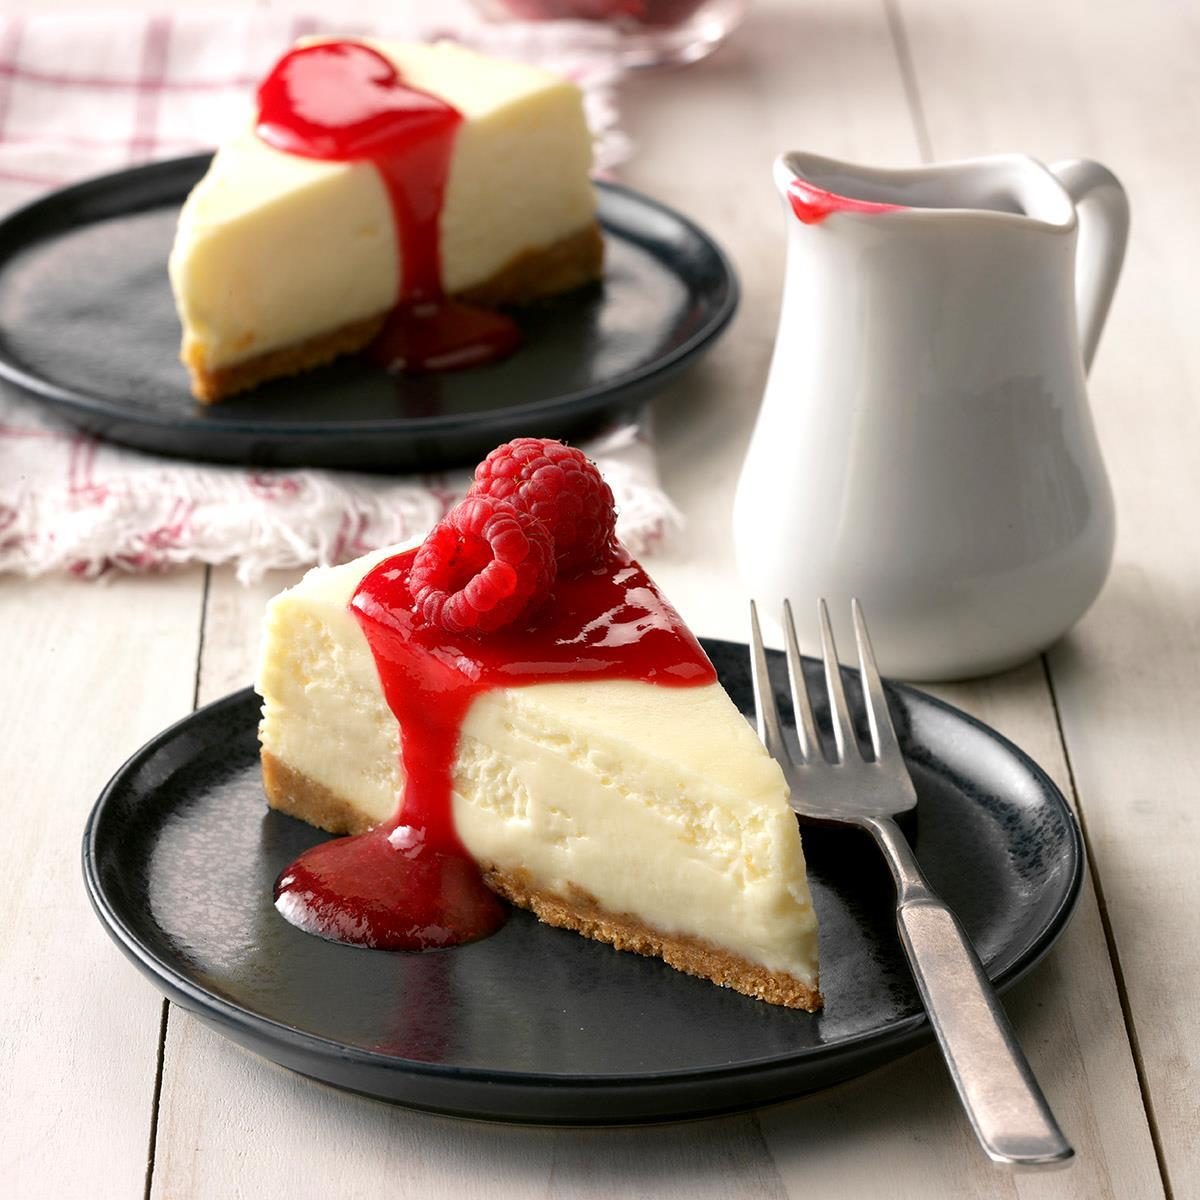 Traditional Cheesecake Recipe: How to Make It